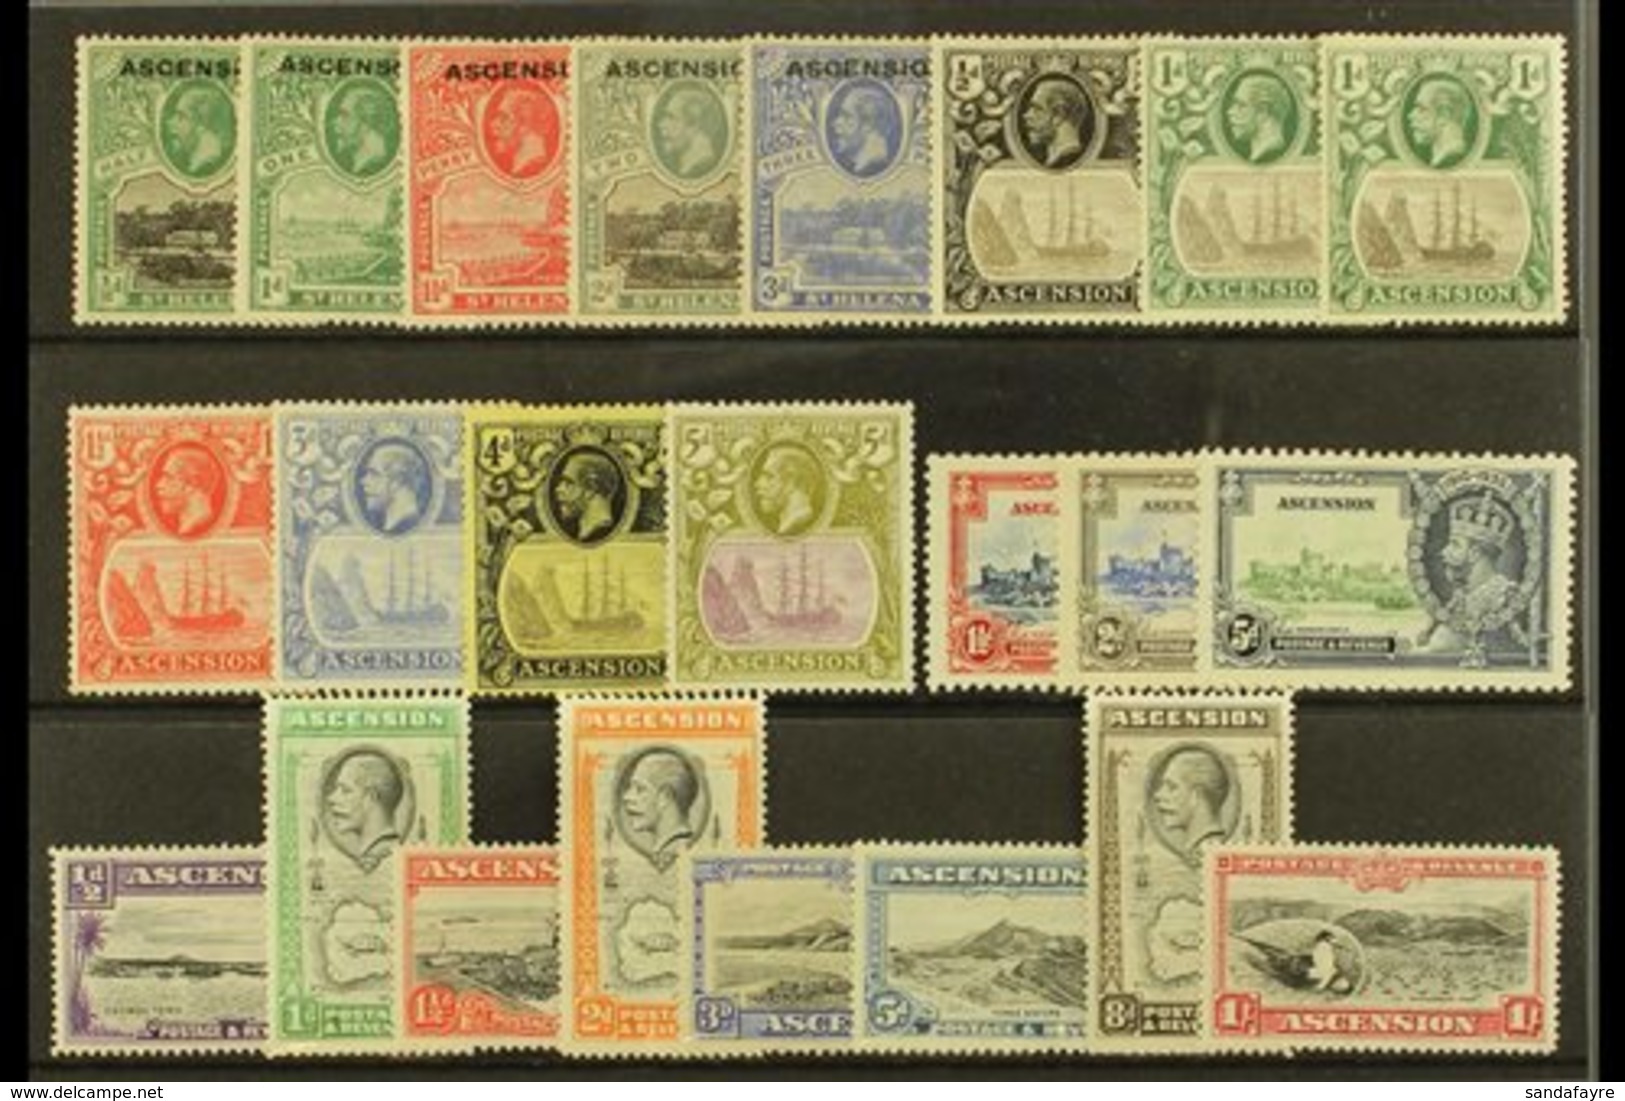 1922-1935 FINE MINT KGV SELECTION Presented On A Stock Card. Includes 1922 Set To 3d, 1924-33 "Badge" To 5d, 1934 Set To - Ascension